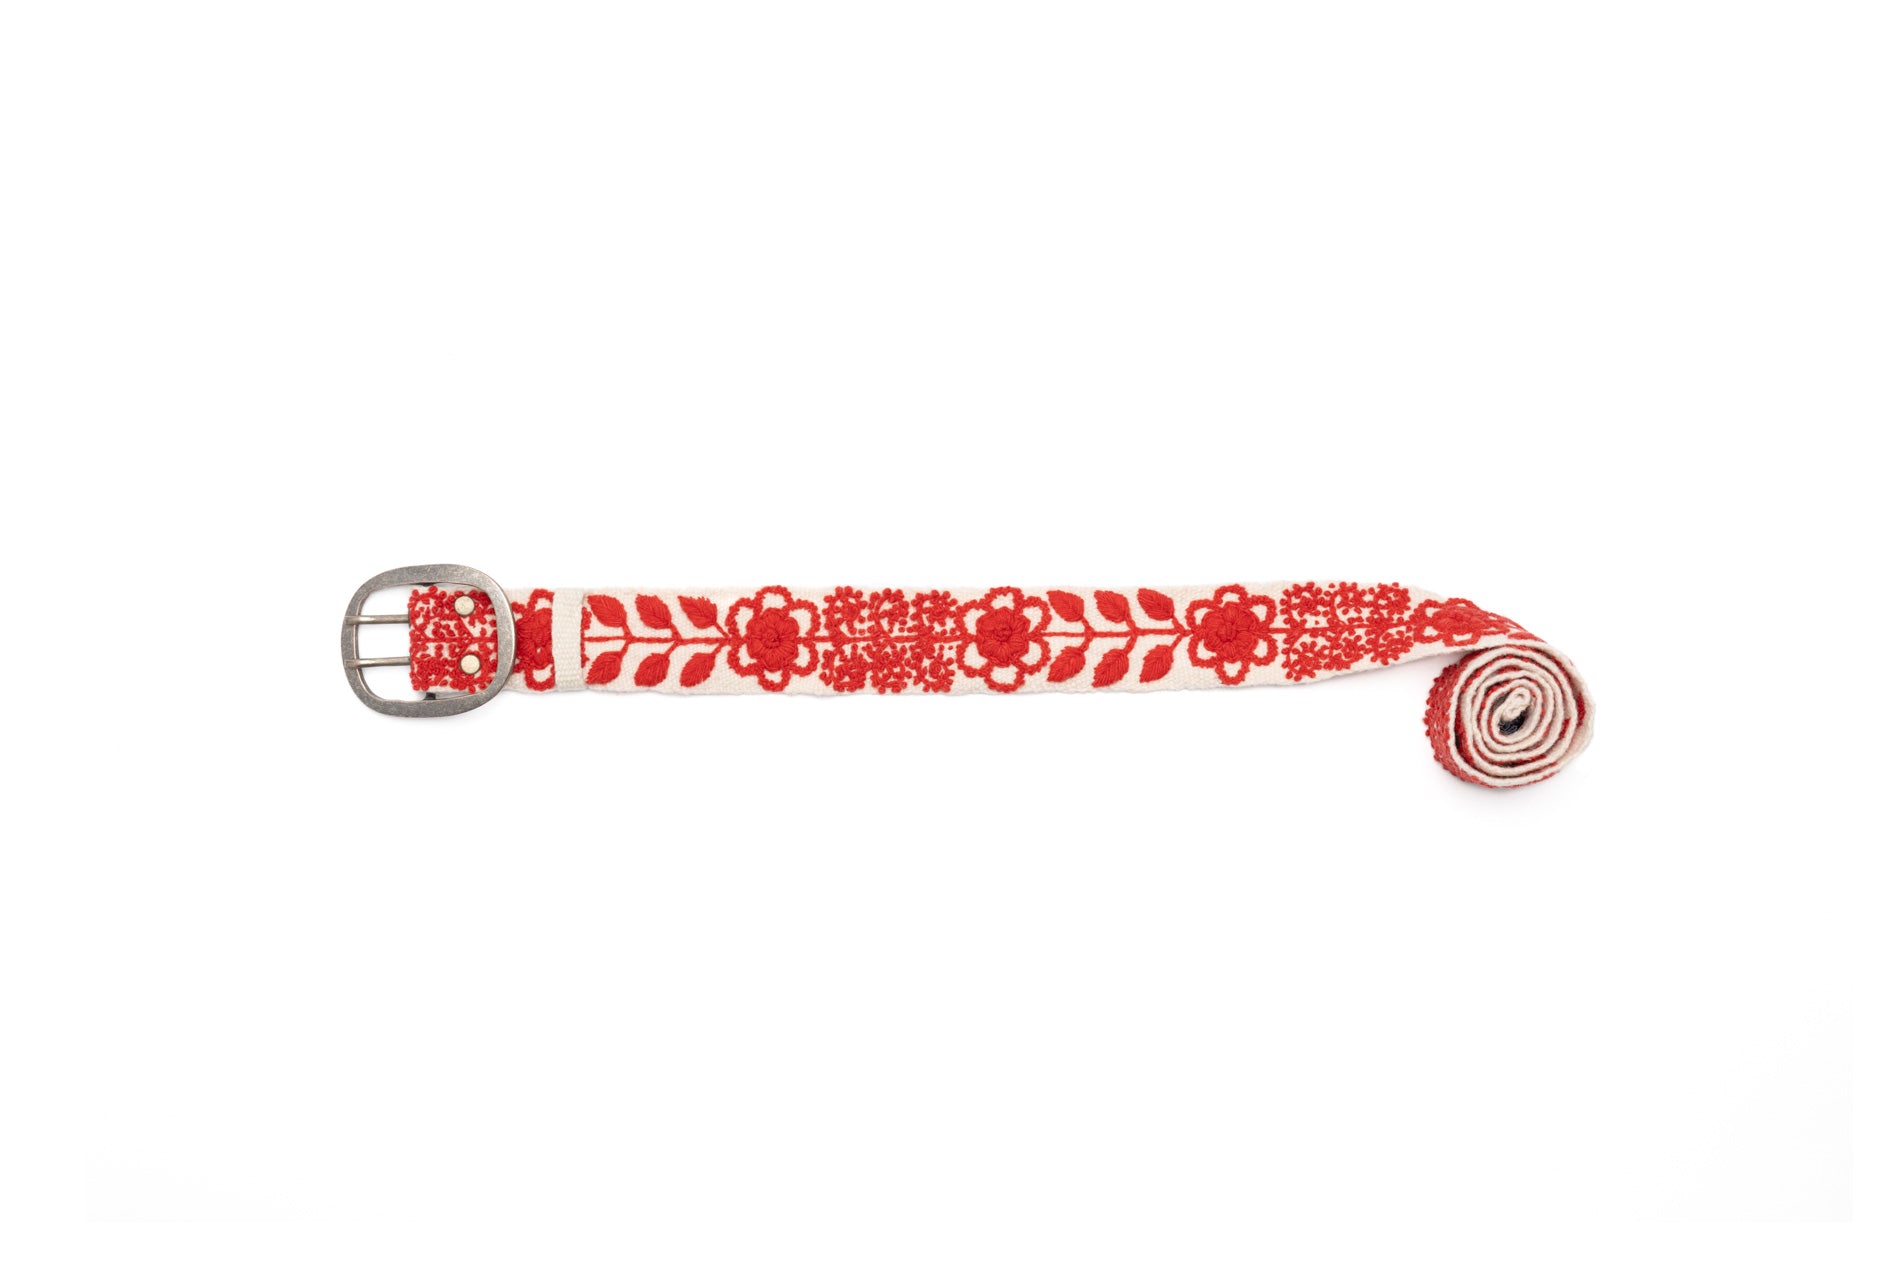 Hand-loomed cream wool Abbey Belt with red embroidered leaves and flowers. Handcrafted by fair trade artisans in the Andes Mountains, Peru. Sizes: Small, Medium, Large, Extra Large.